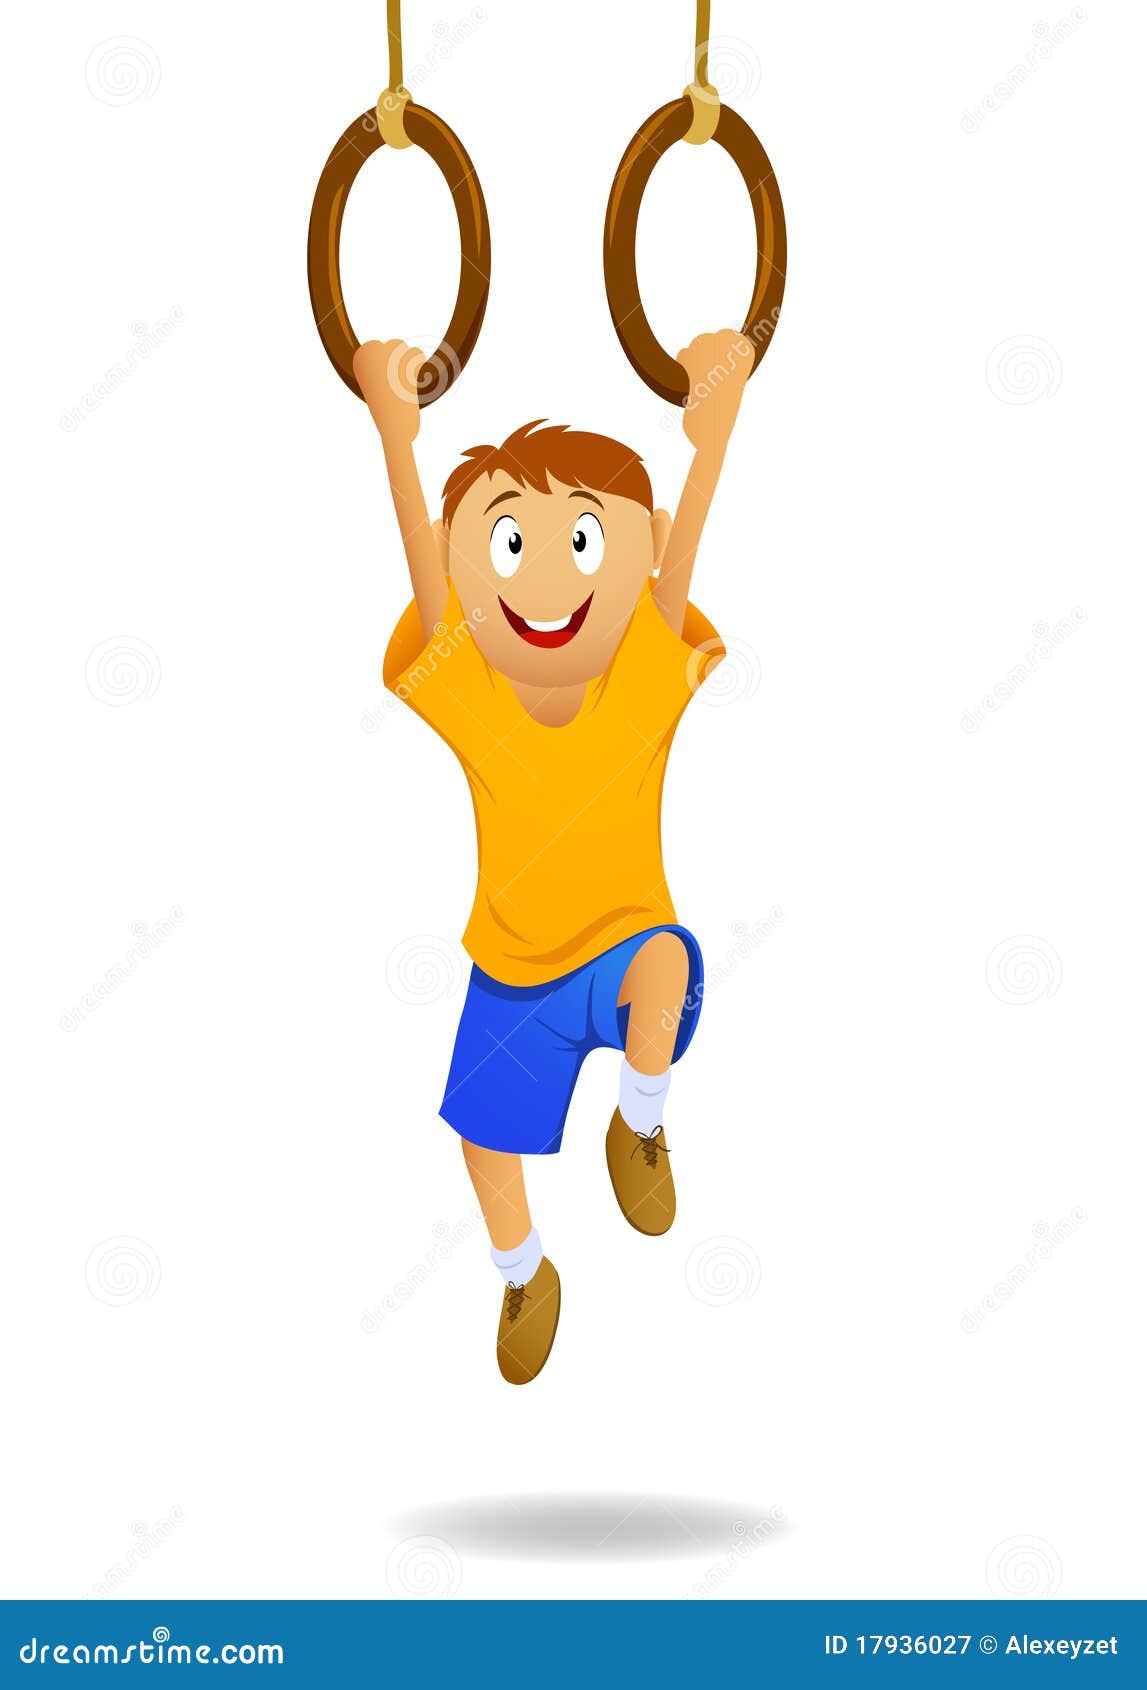 Happy Cartoon Boy Hanging on Gymnastic Rings Stock Vector - Illustration of  hands, high: 17936027